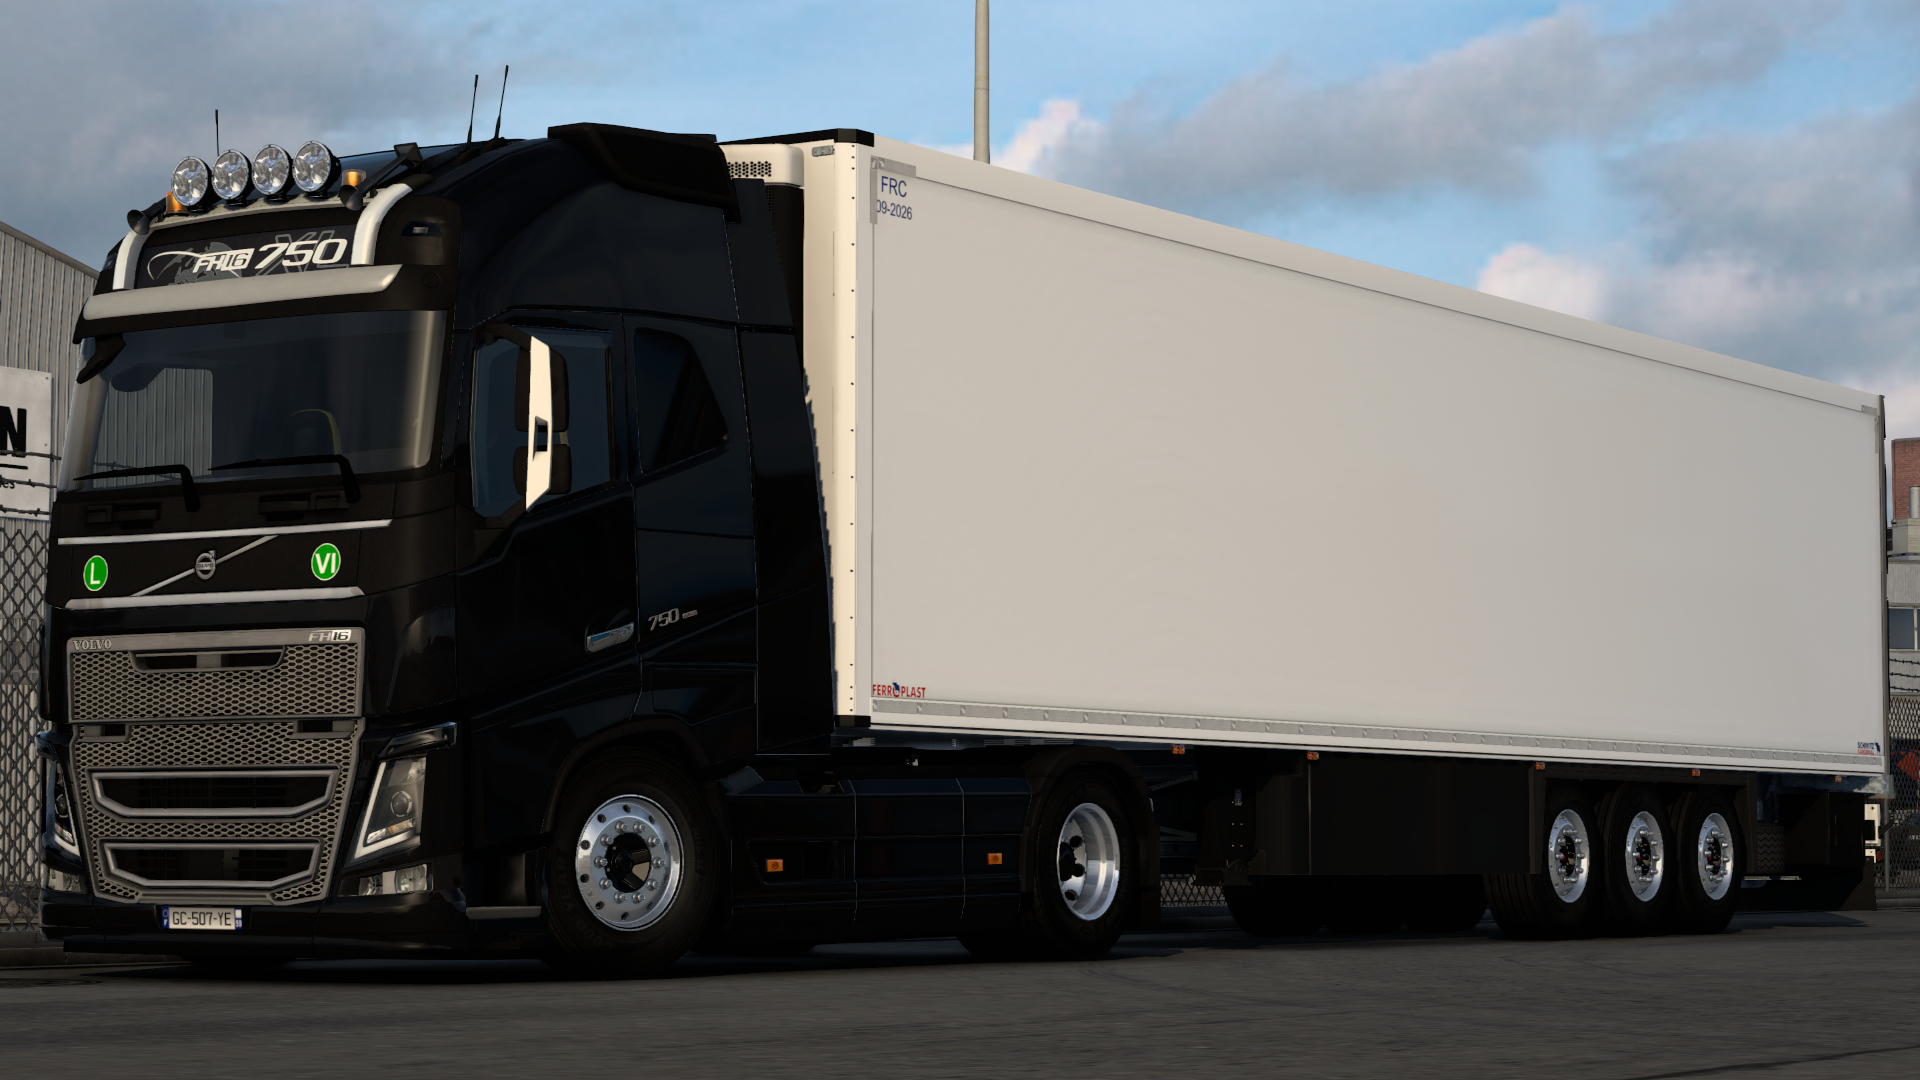 ets2_20230530_220444_00.png